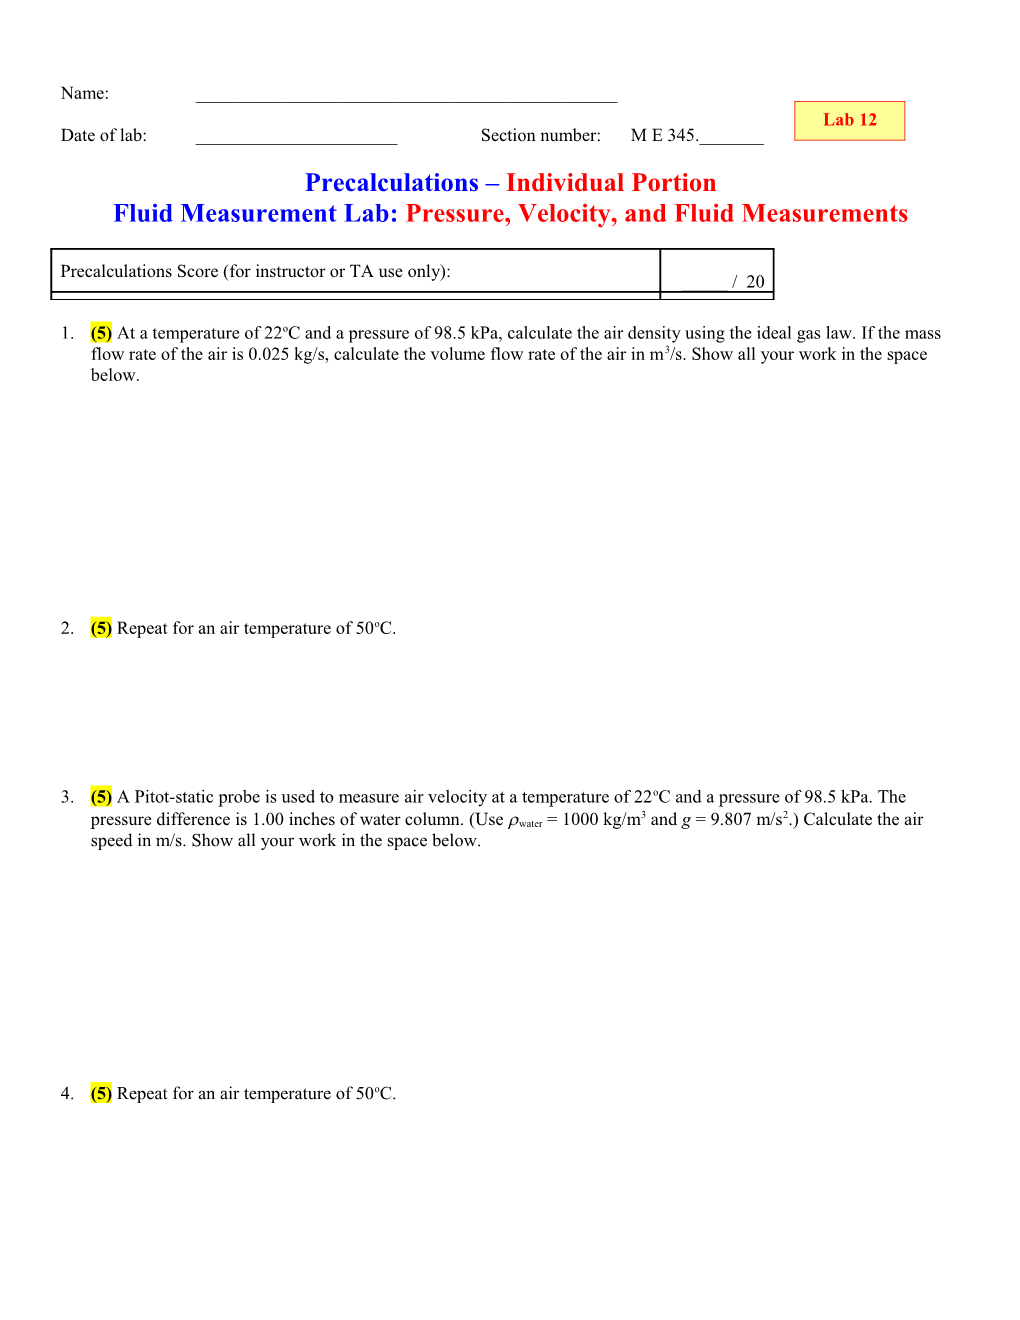 Cover Page for Precalculations Individual Portion s3